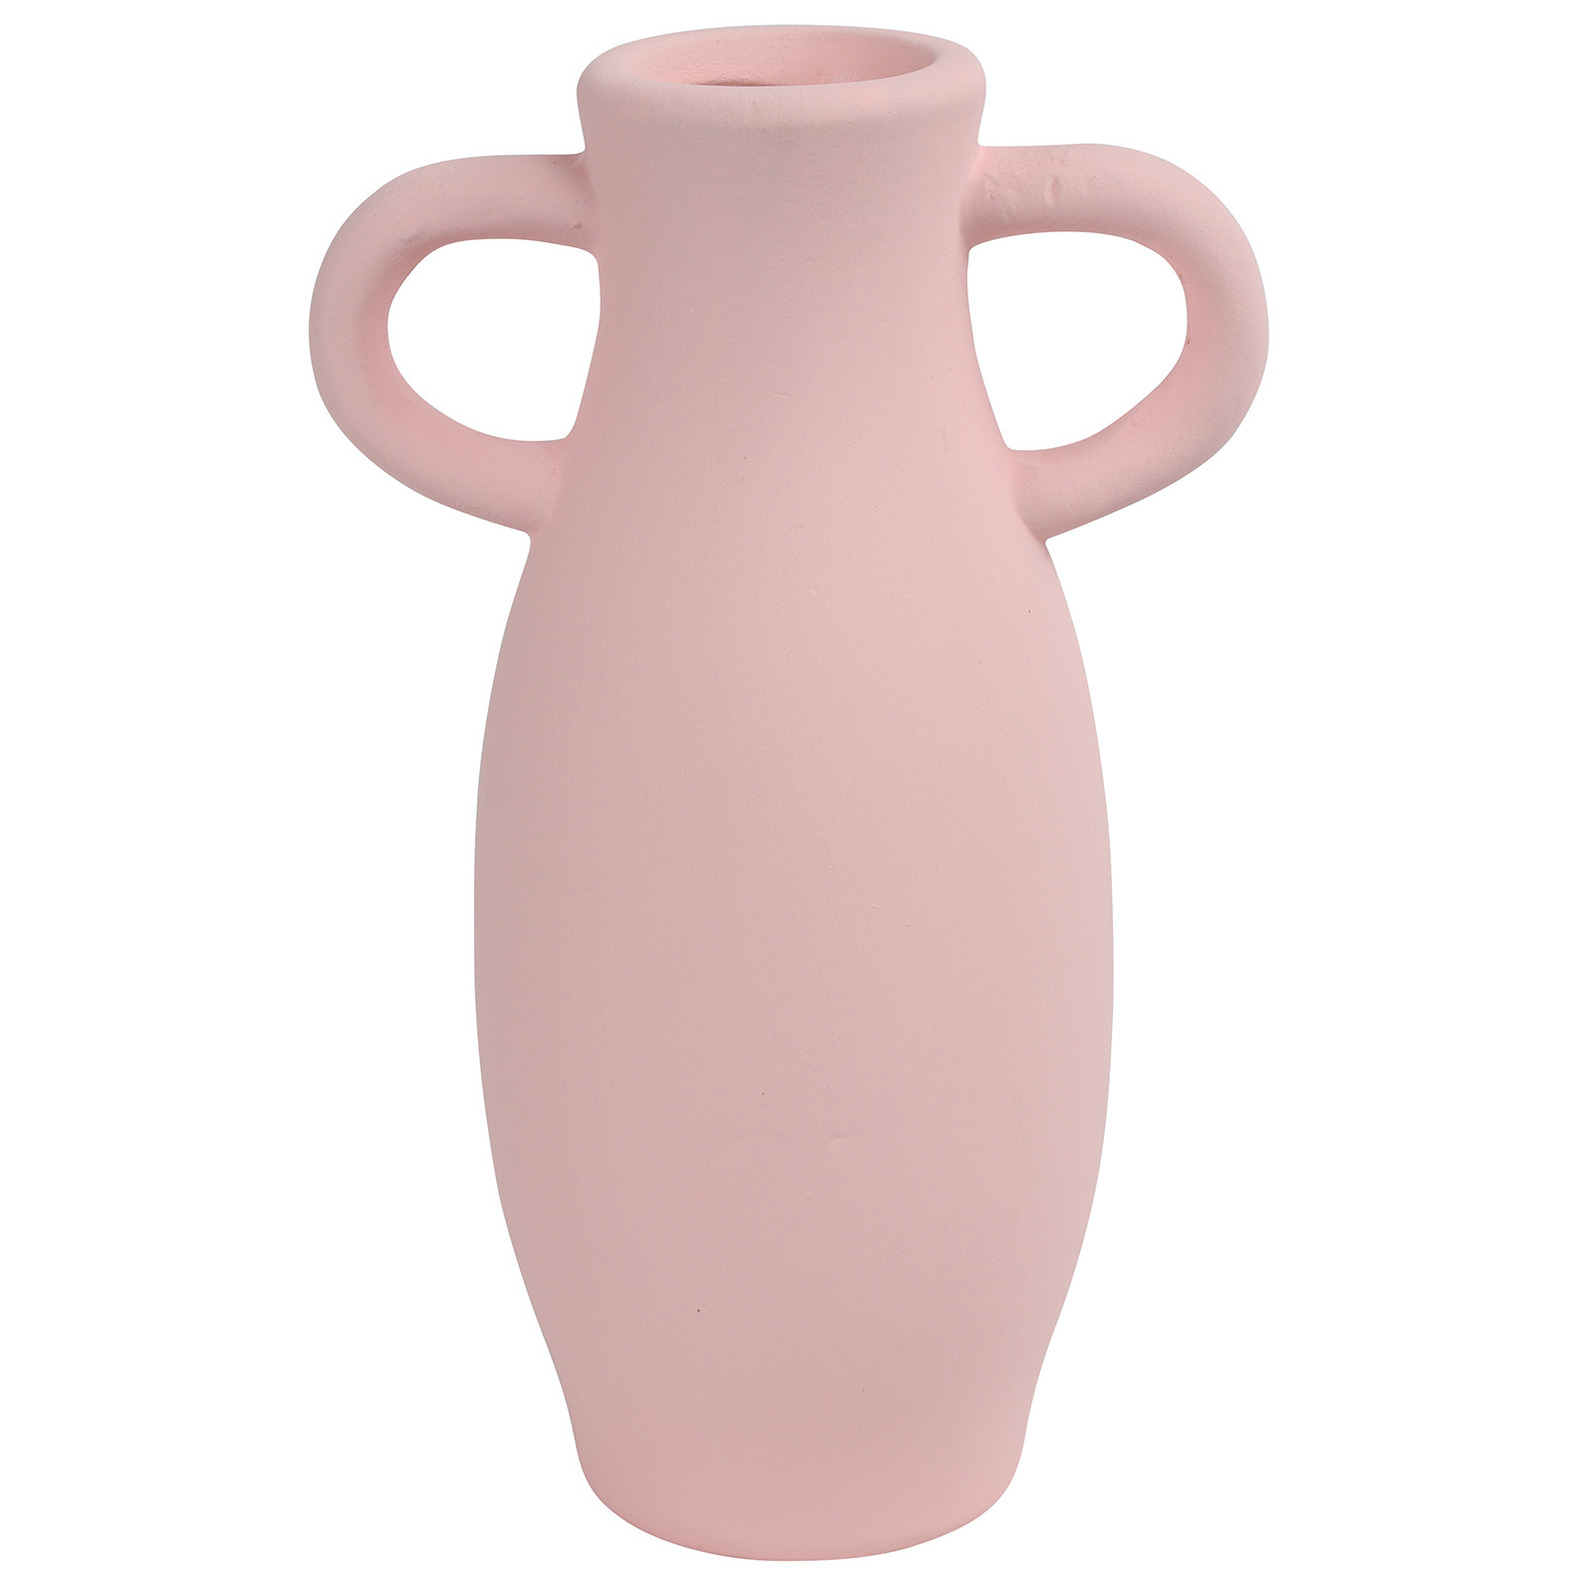 Countryfield Amphora vaas - roze terracotta - D12 x H20 cm - smalle opening -